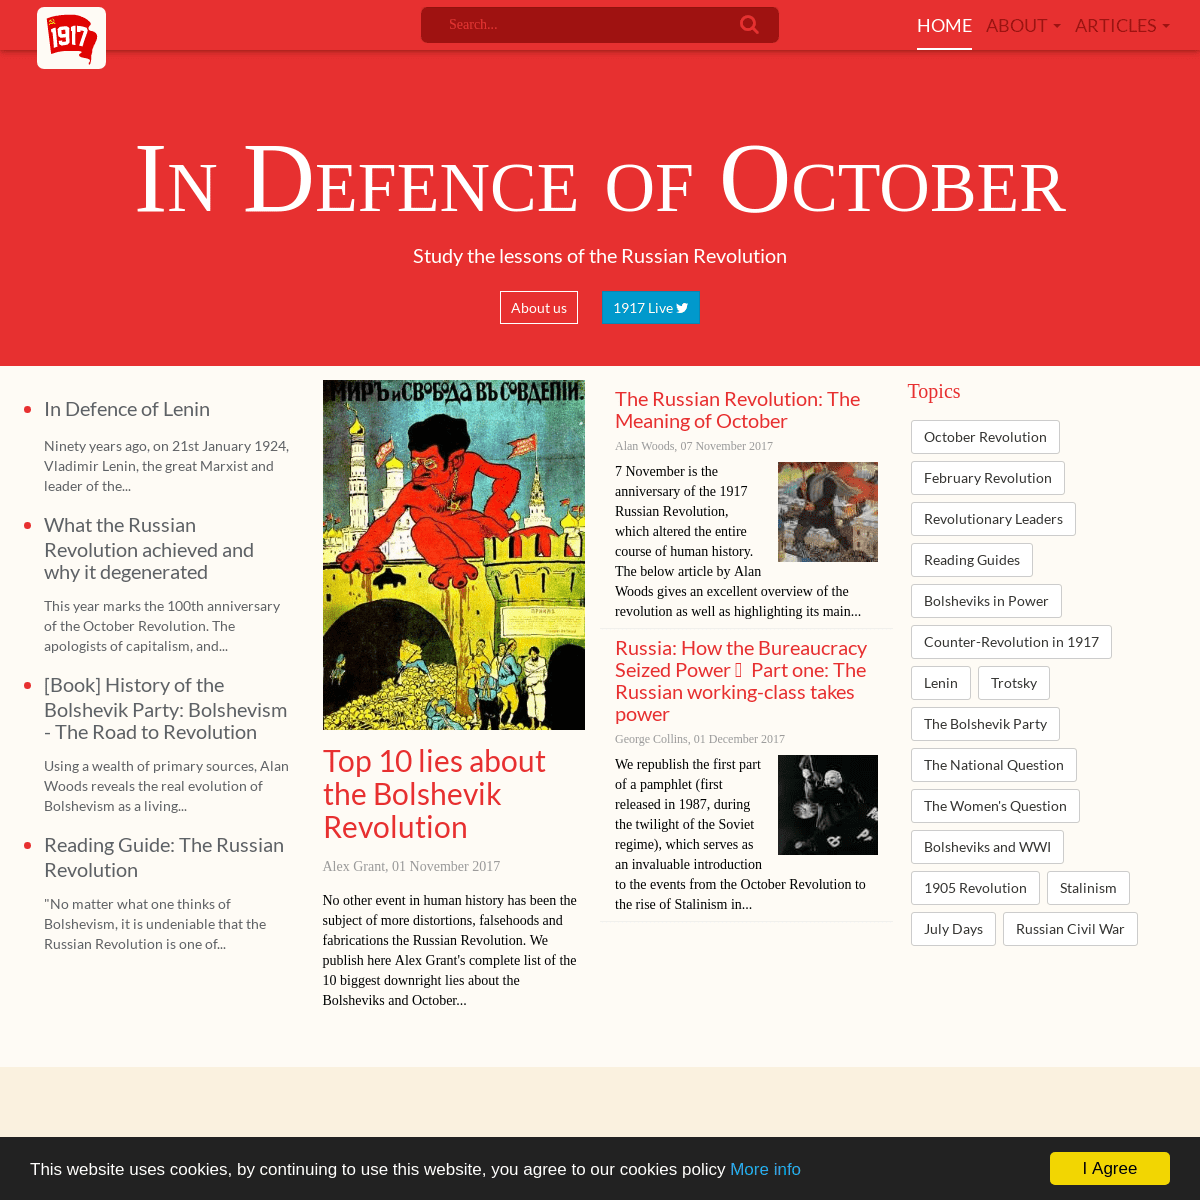 In Defence of October